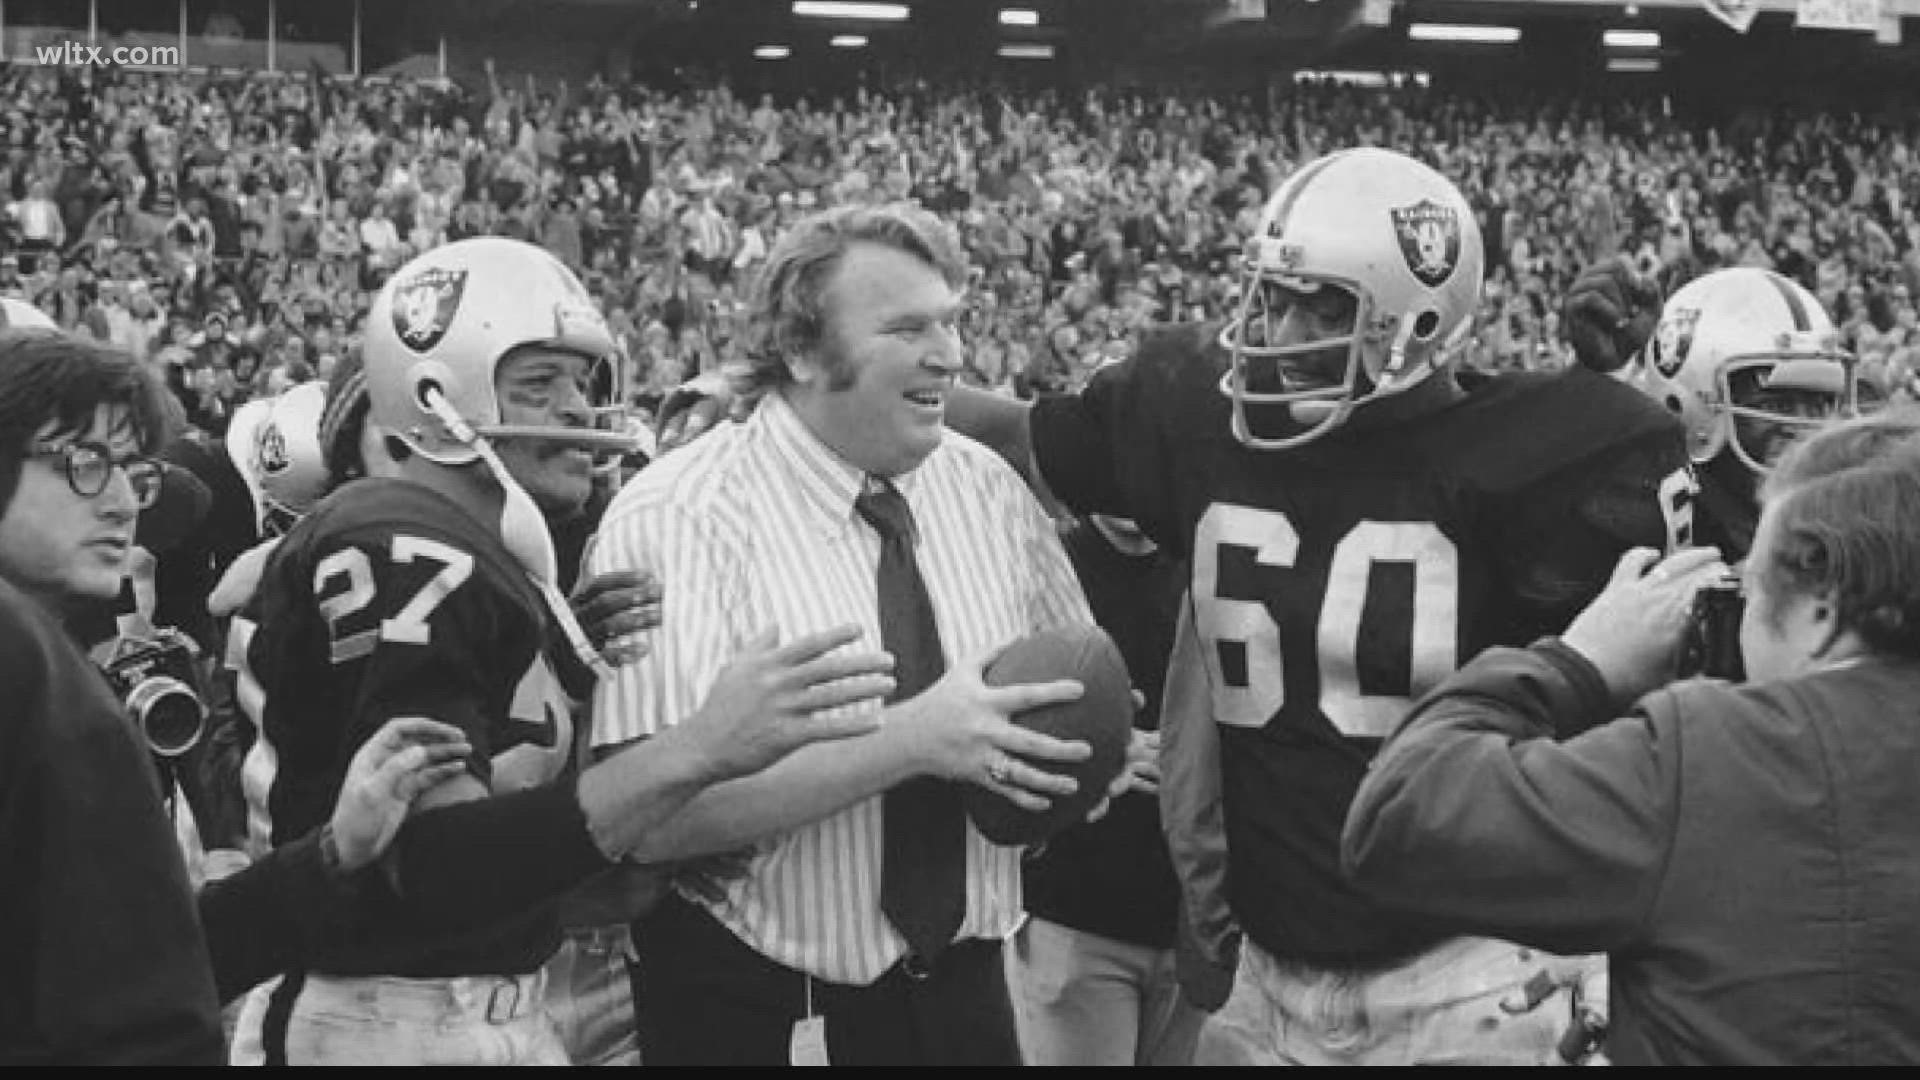 Hall of Fame coach turned broadcaster John Madden, died unexpectedly Tuesday morning, the NFL said.